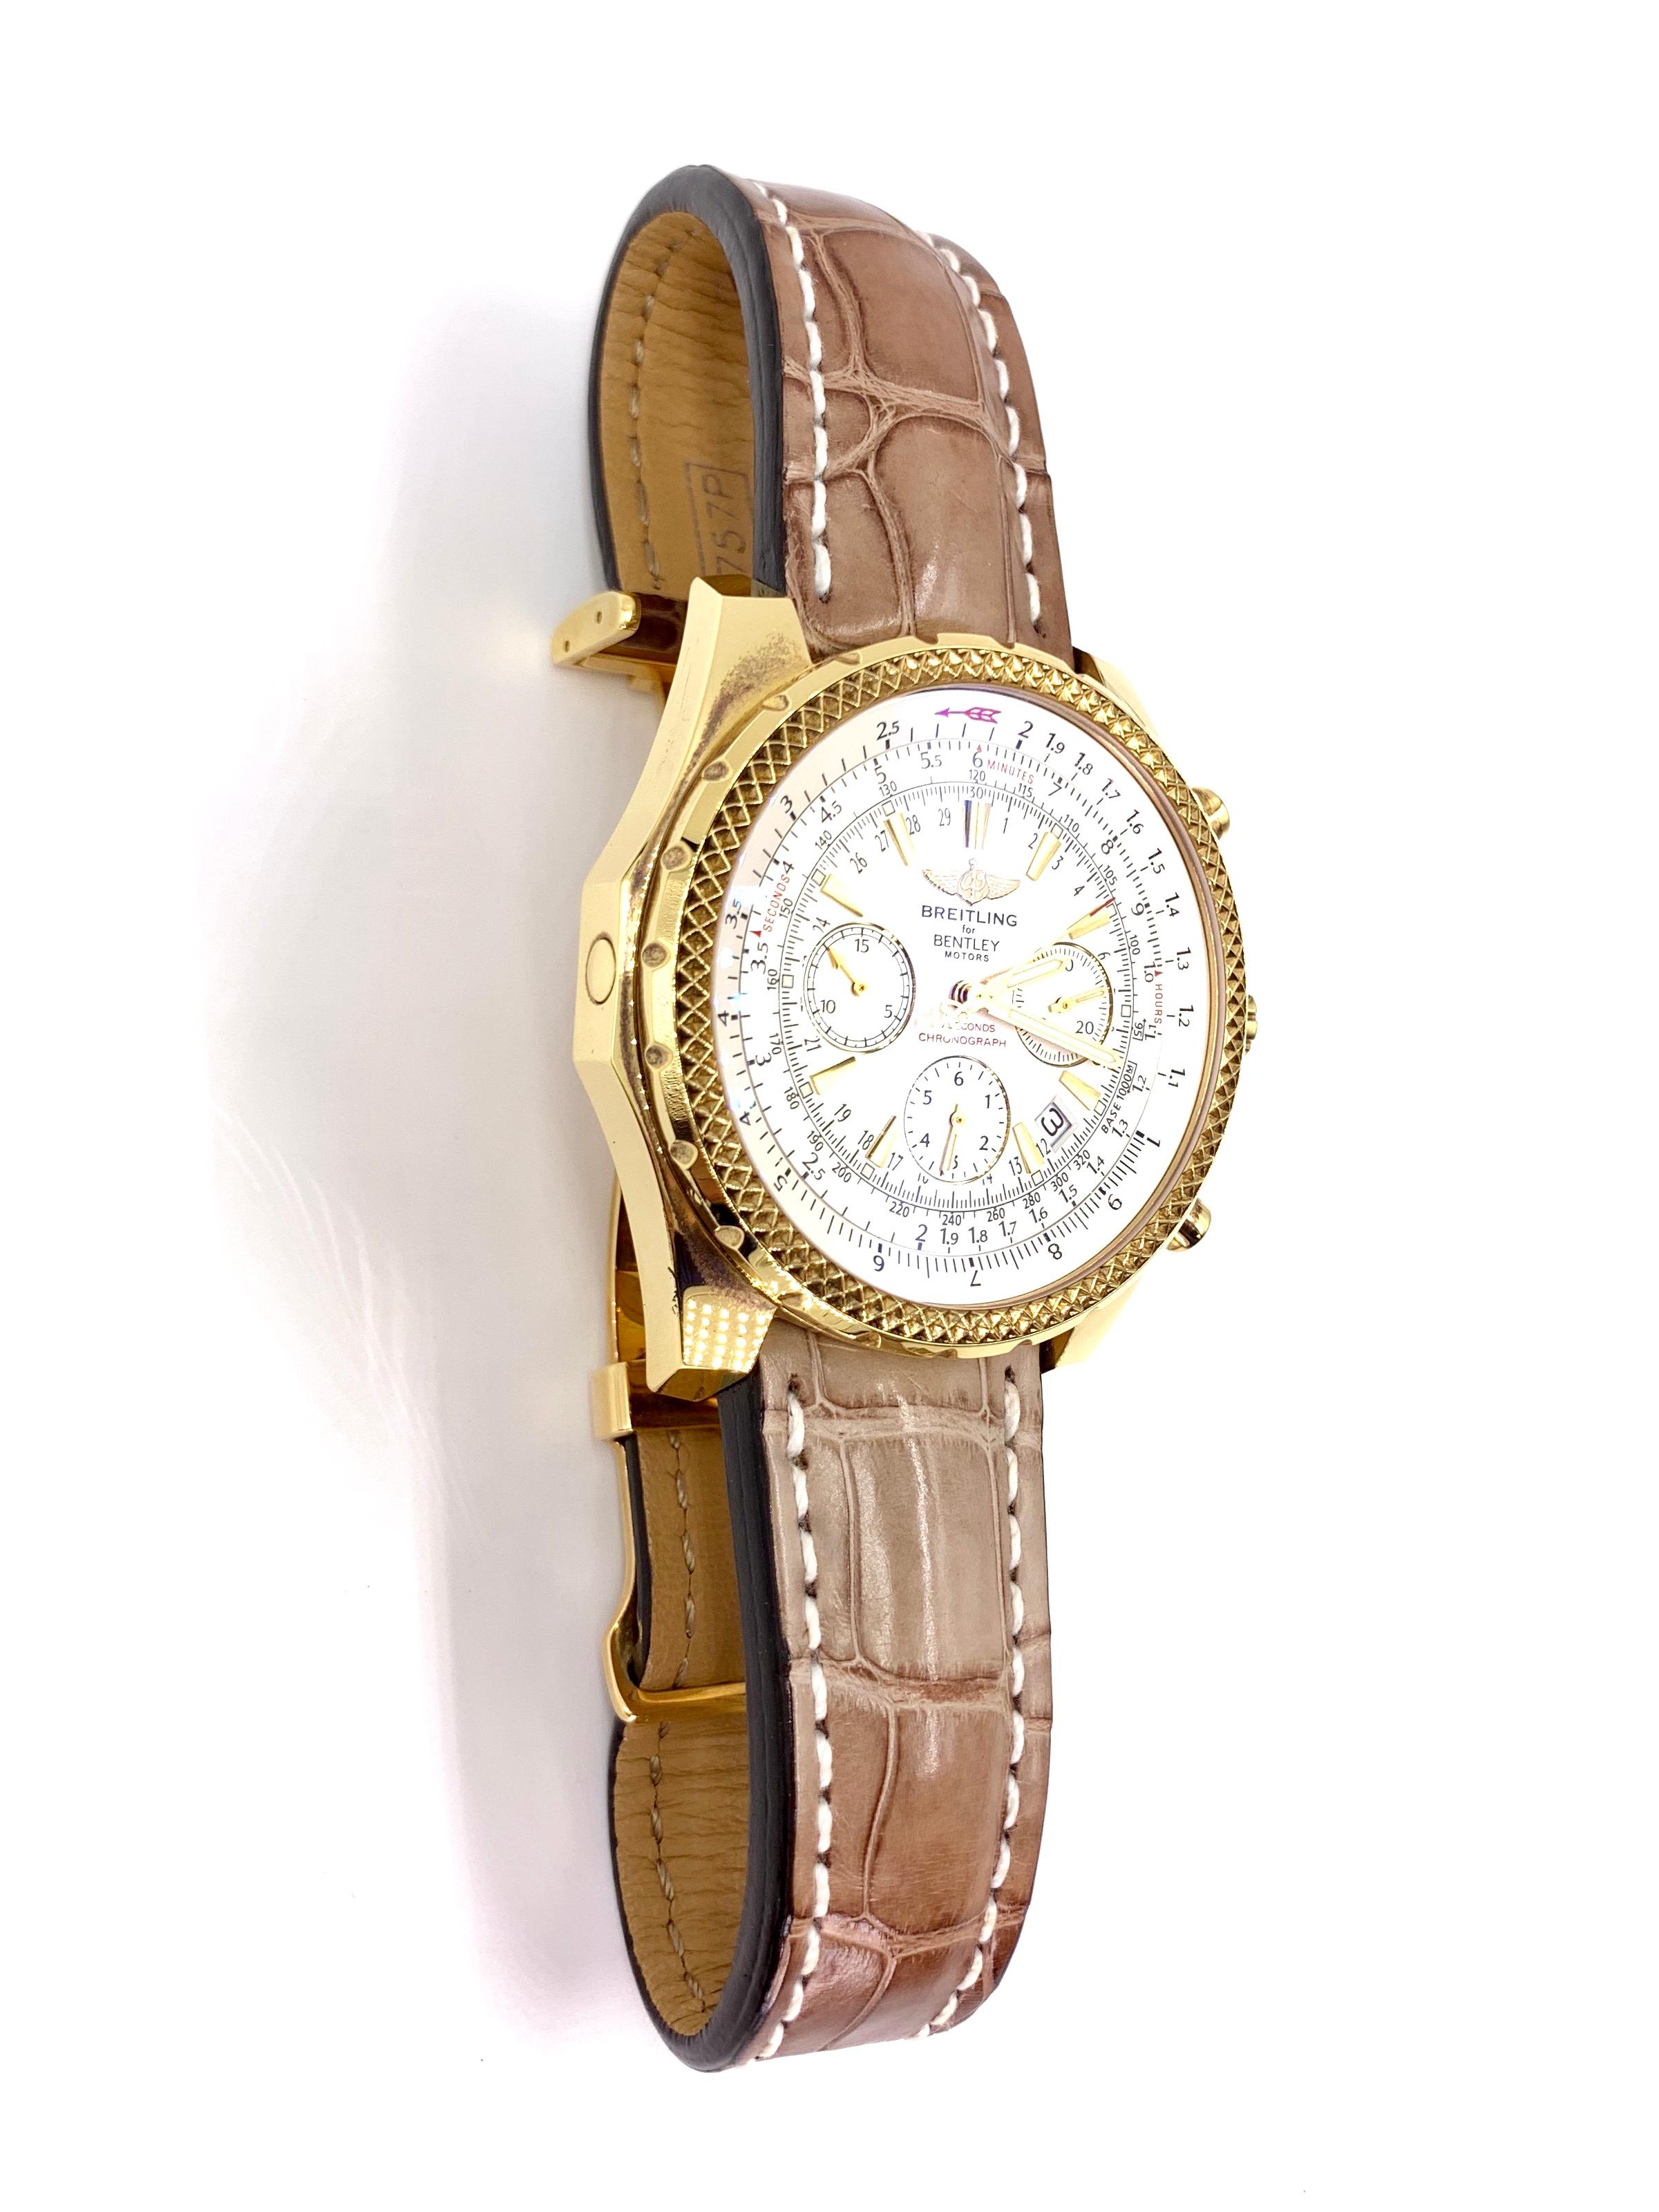 Breitling Bentley Motors self-winding automatic watch, featuring a 49mm 18 karat yellow gold case surrounding a silver dial on the original Breitling light brown croco strap with an 18k yellow gold deployment buckle. Functions include hours,